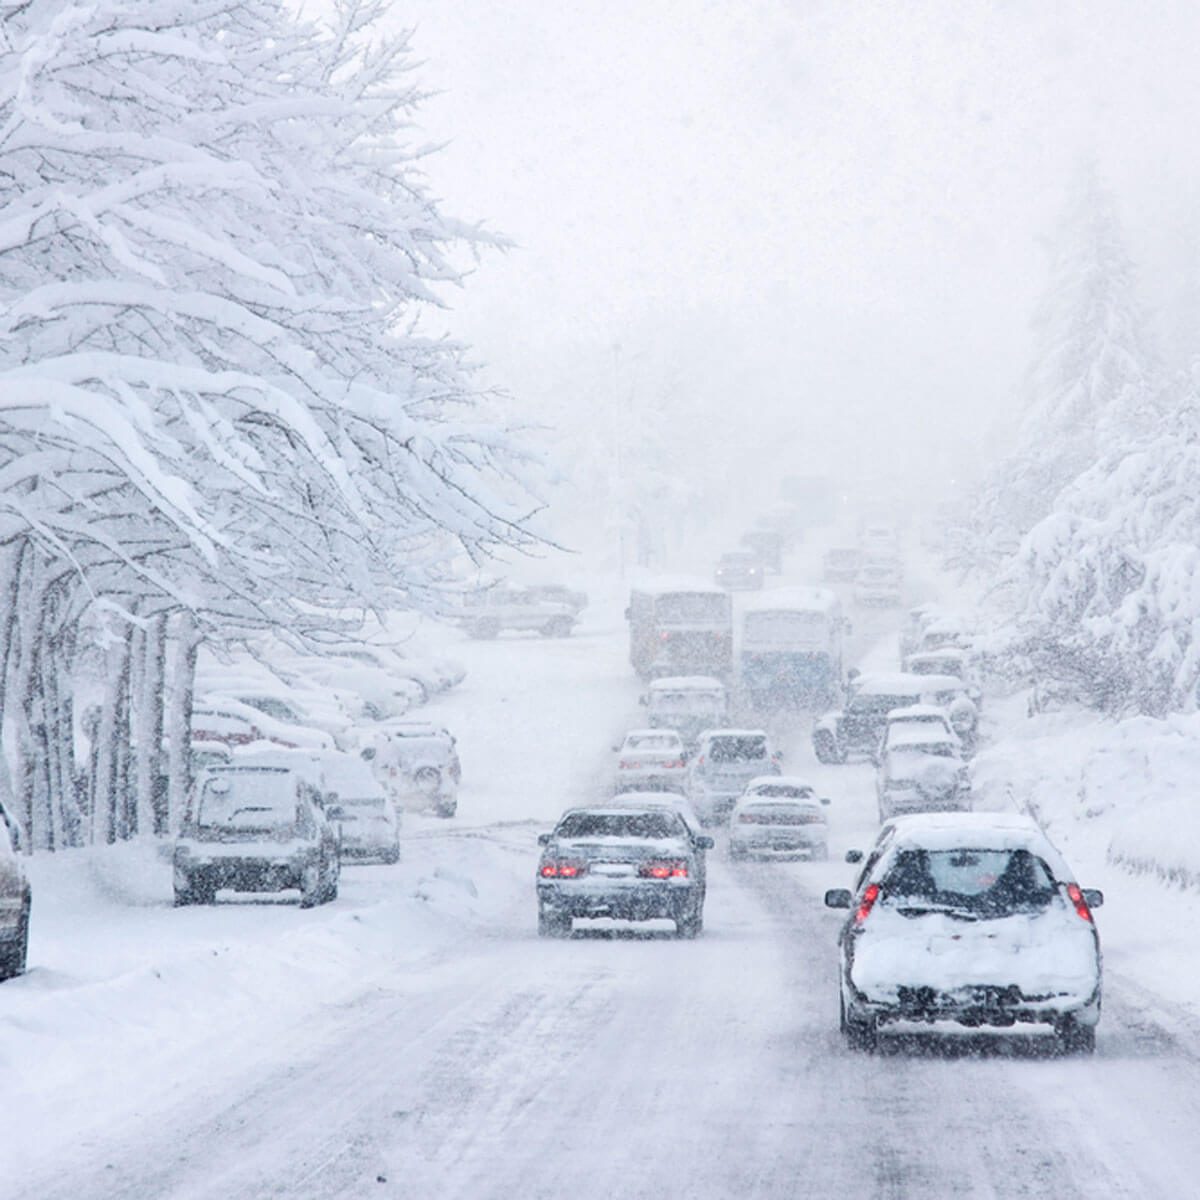 Winter Driving Tips: Go Slow and Leave Space